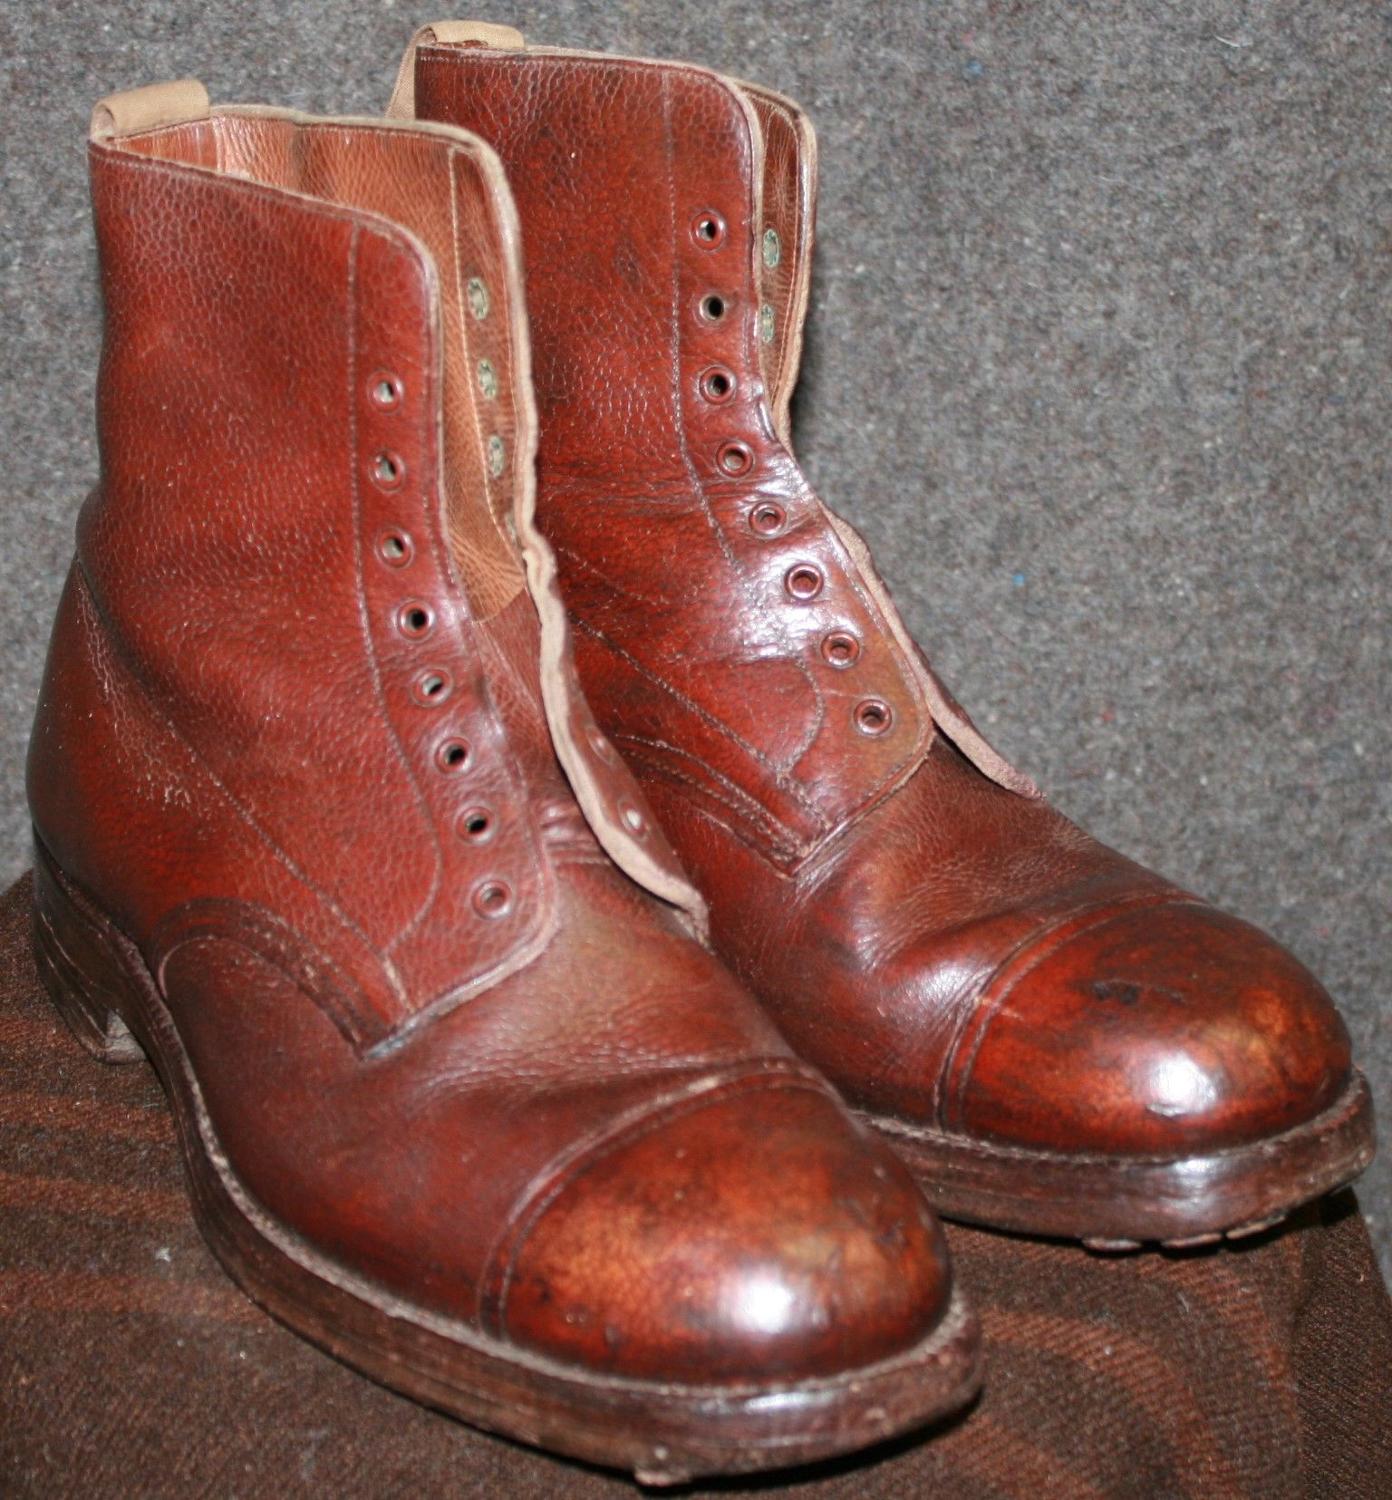 A RARE PAIR OF 1934 DATED BROWN OFFICERS BOOTS